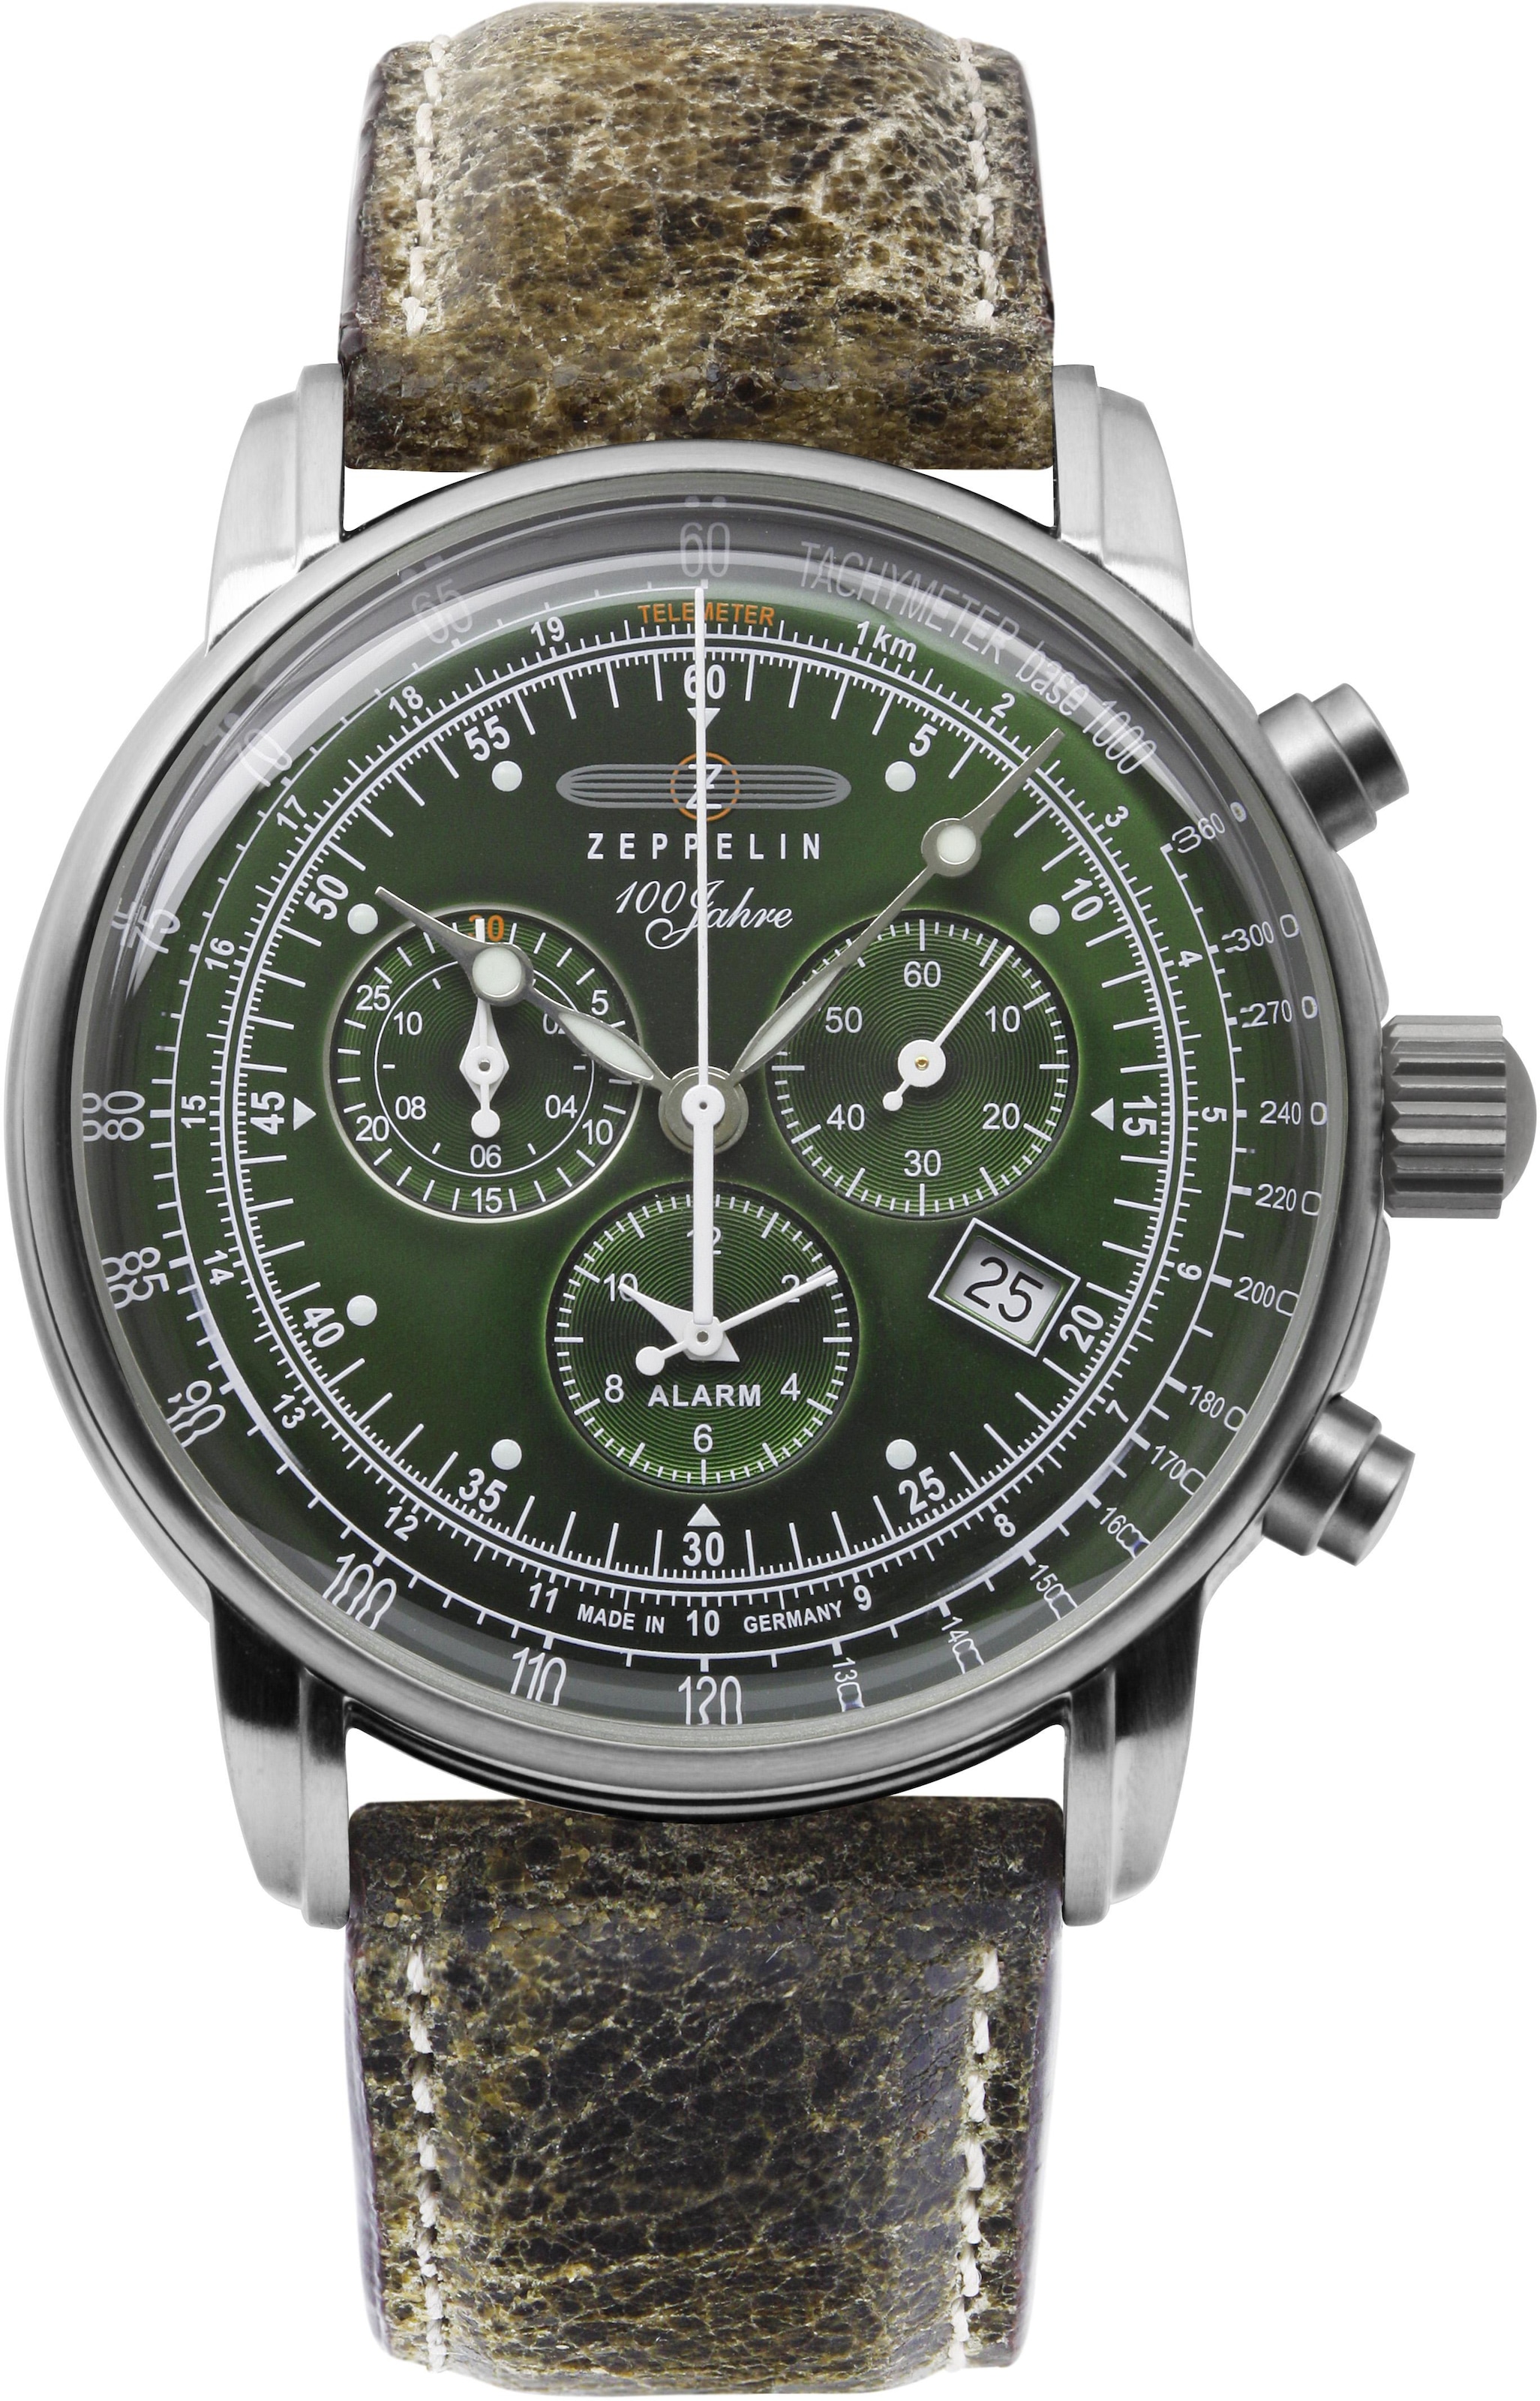 ZEPPELIN Chronograph 100 Jahre Zeppelin 8680-4 Made in Germany